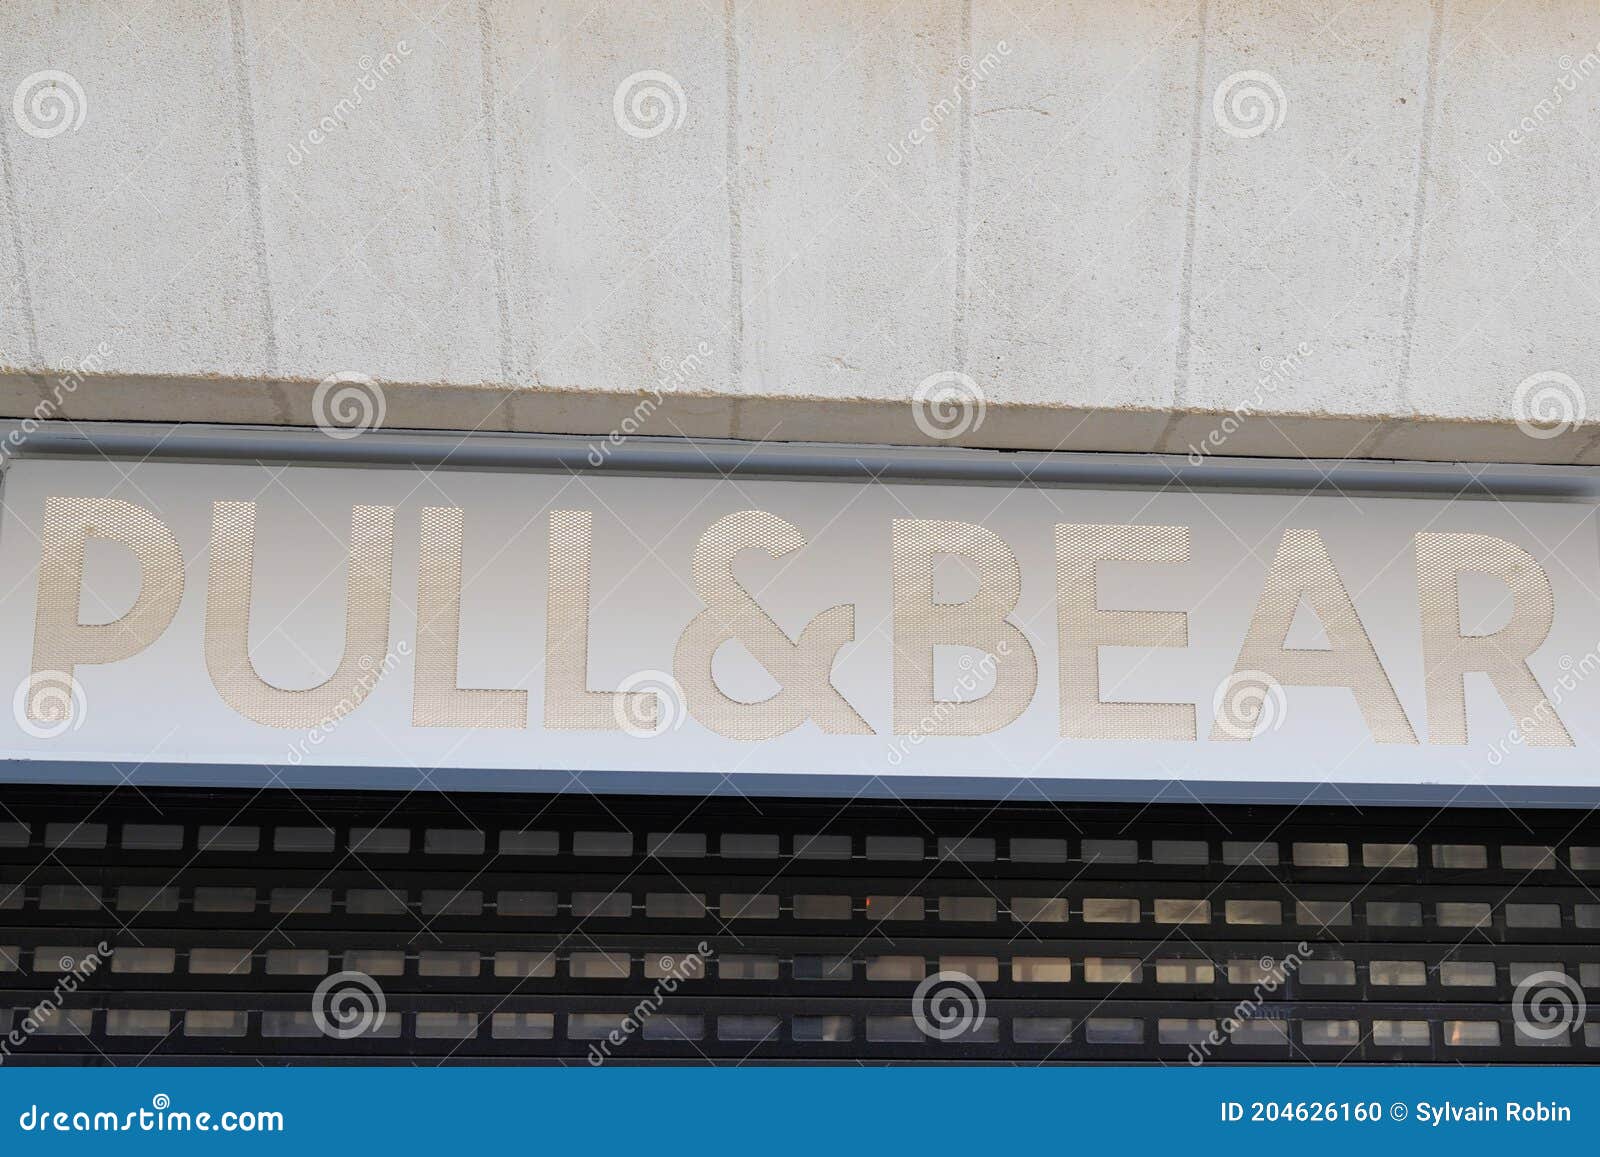 Pull & Bear Text Sign and Logo of Shop Brand Spanish Clothing and Accessories Image - Image of europa, famous: 204626160